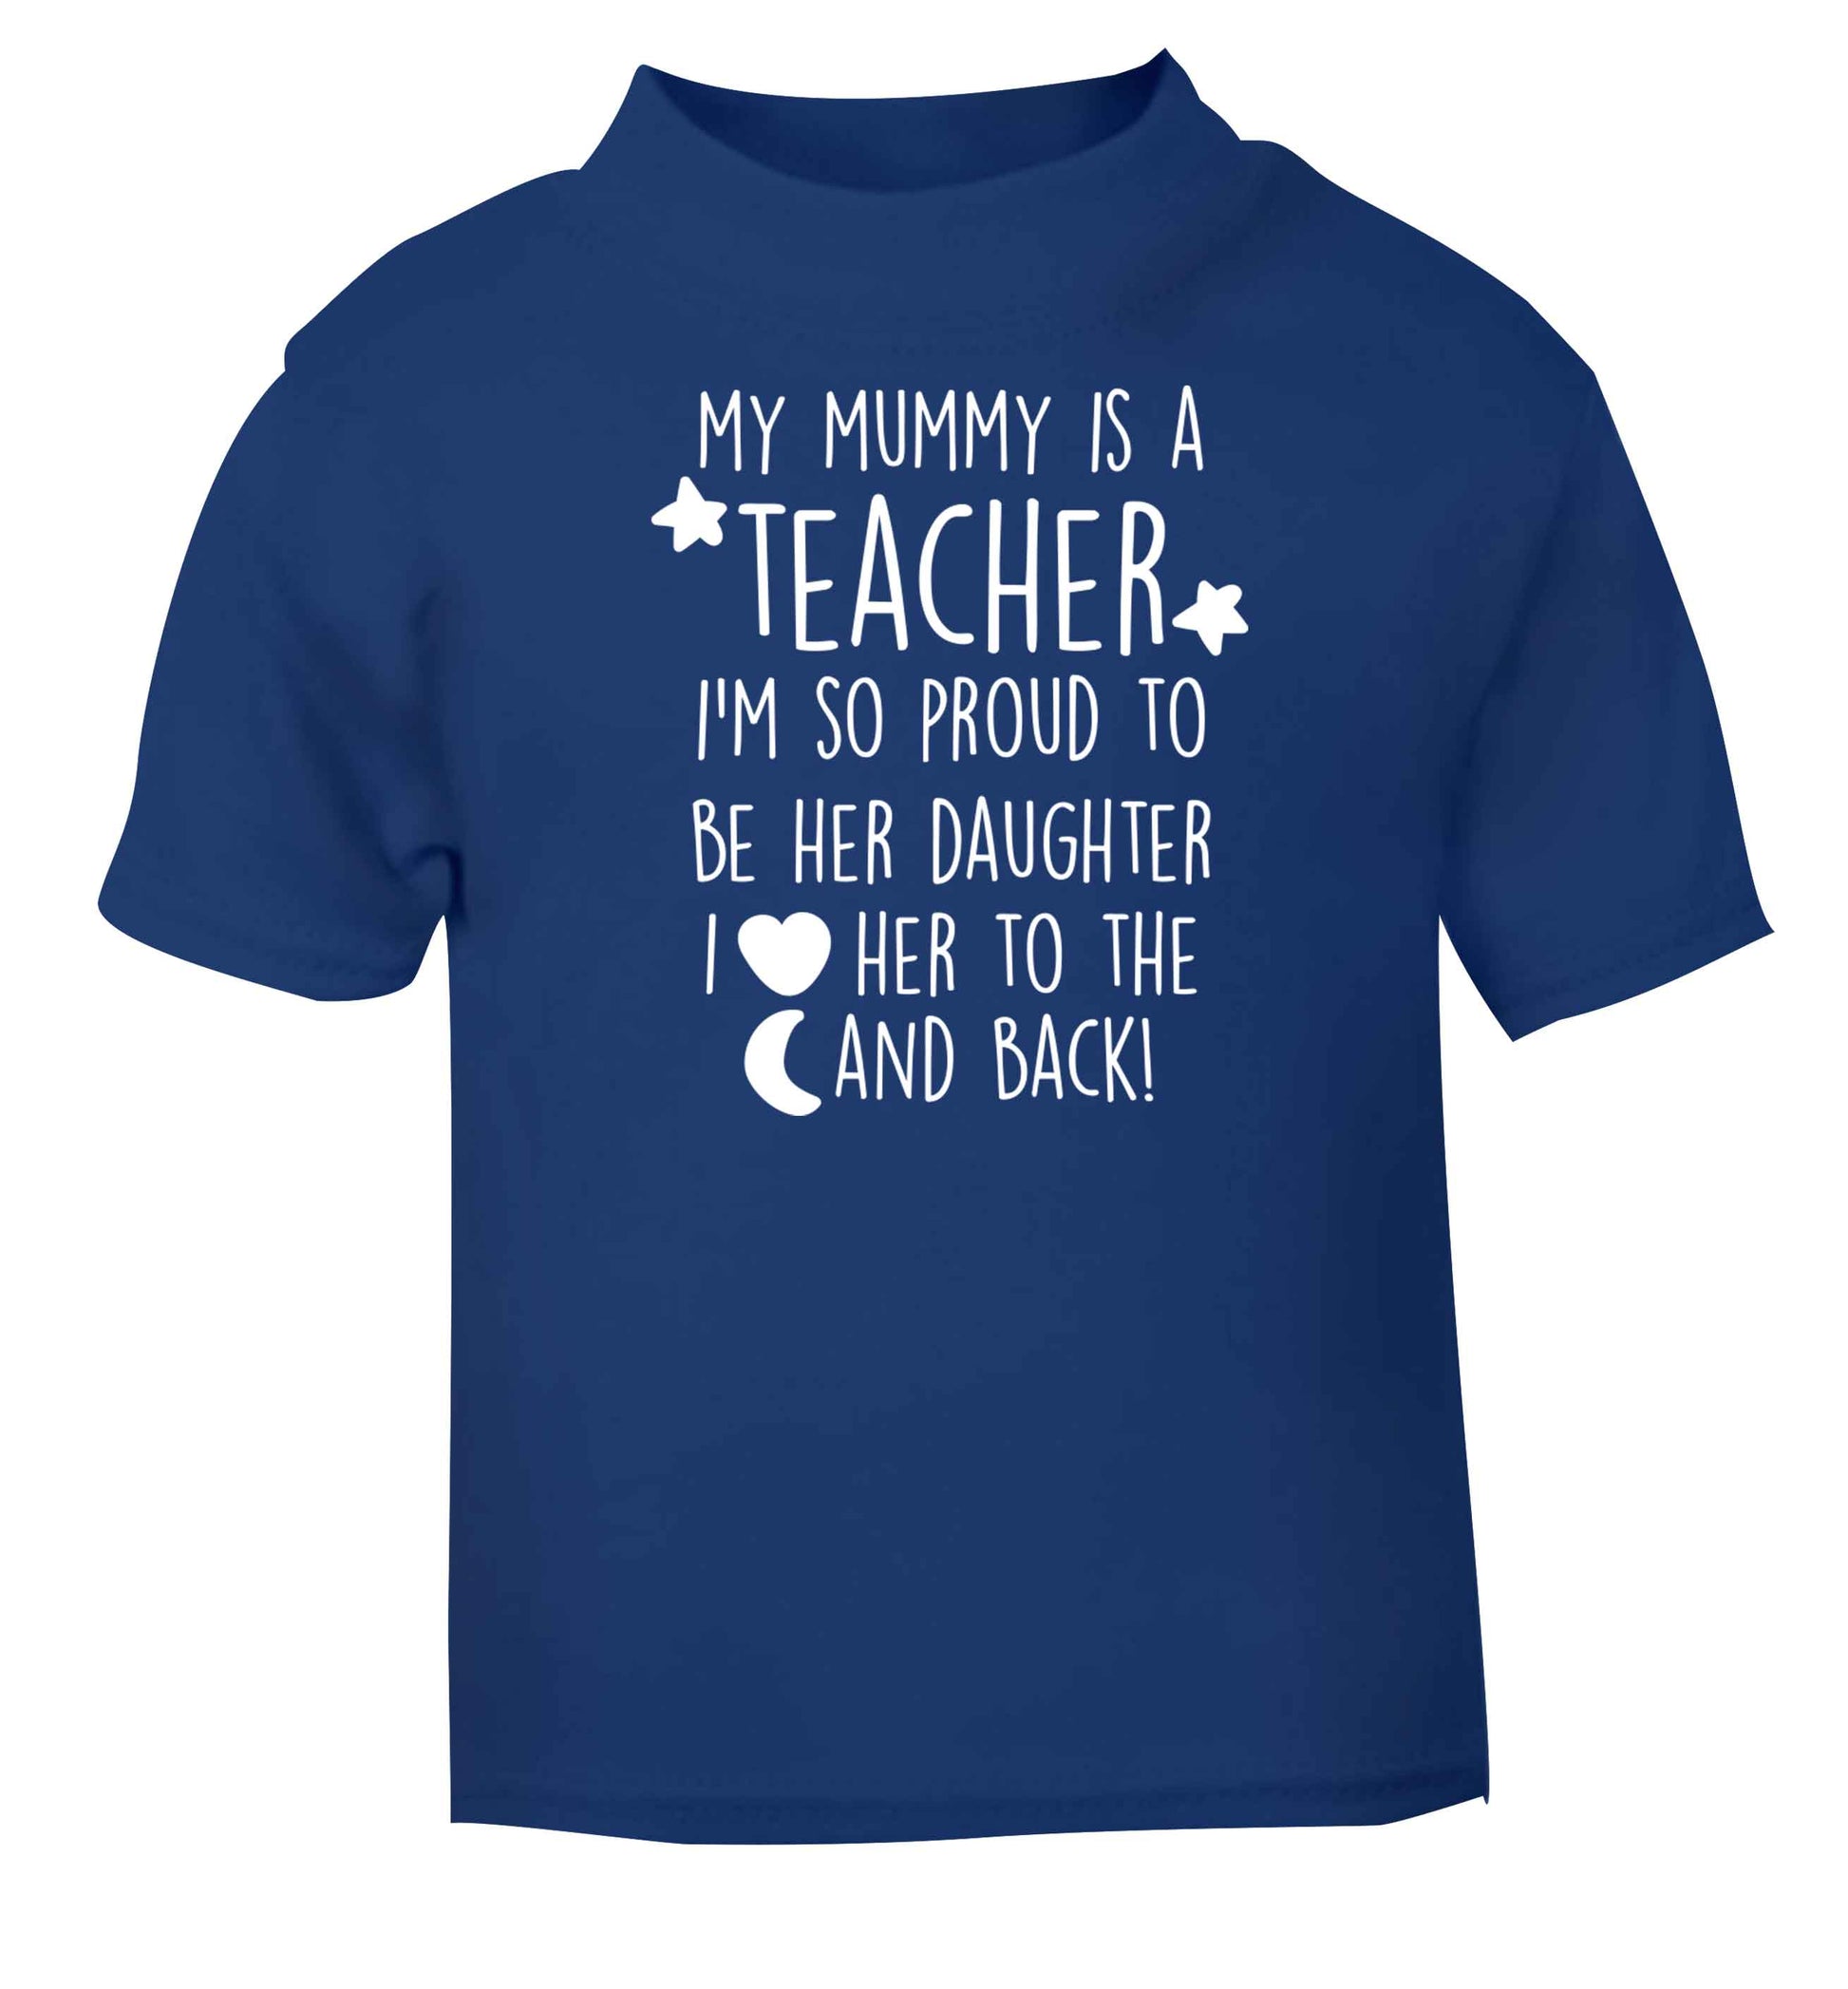 My mummy is a teacher I'm so proud to be her daughter I love her to the moon and back blue baby toddler Tshirt 2 Years